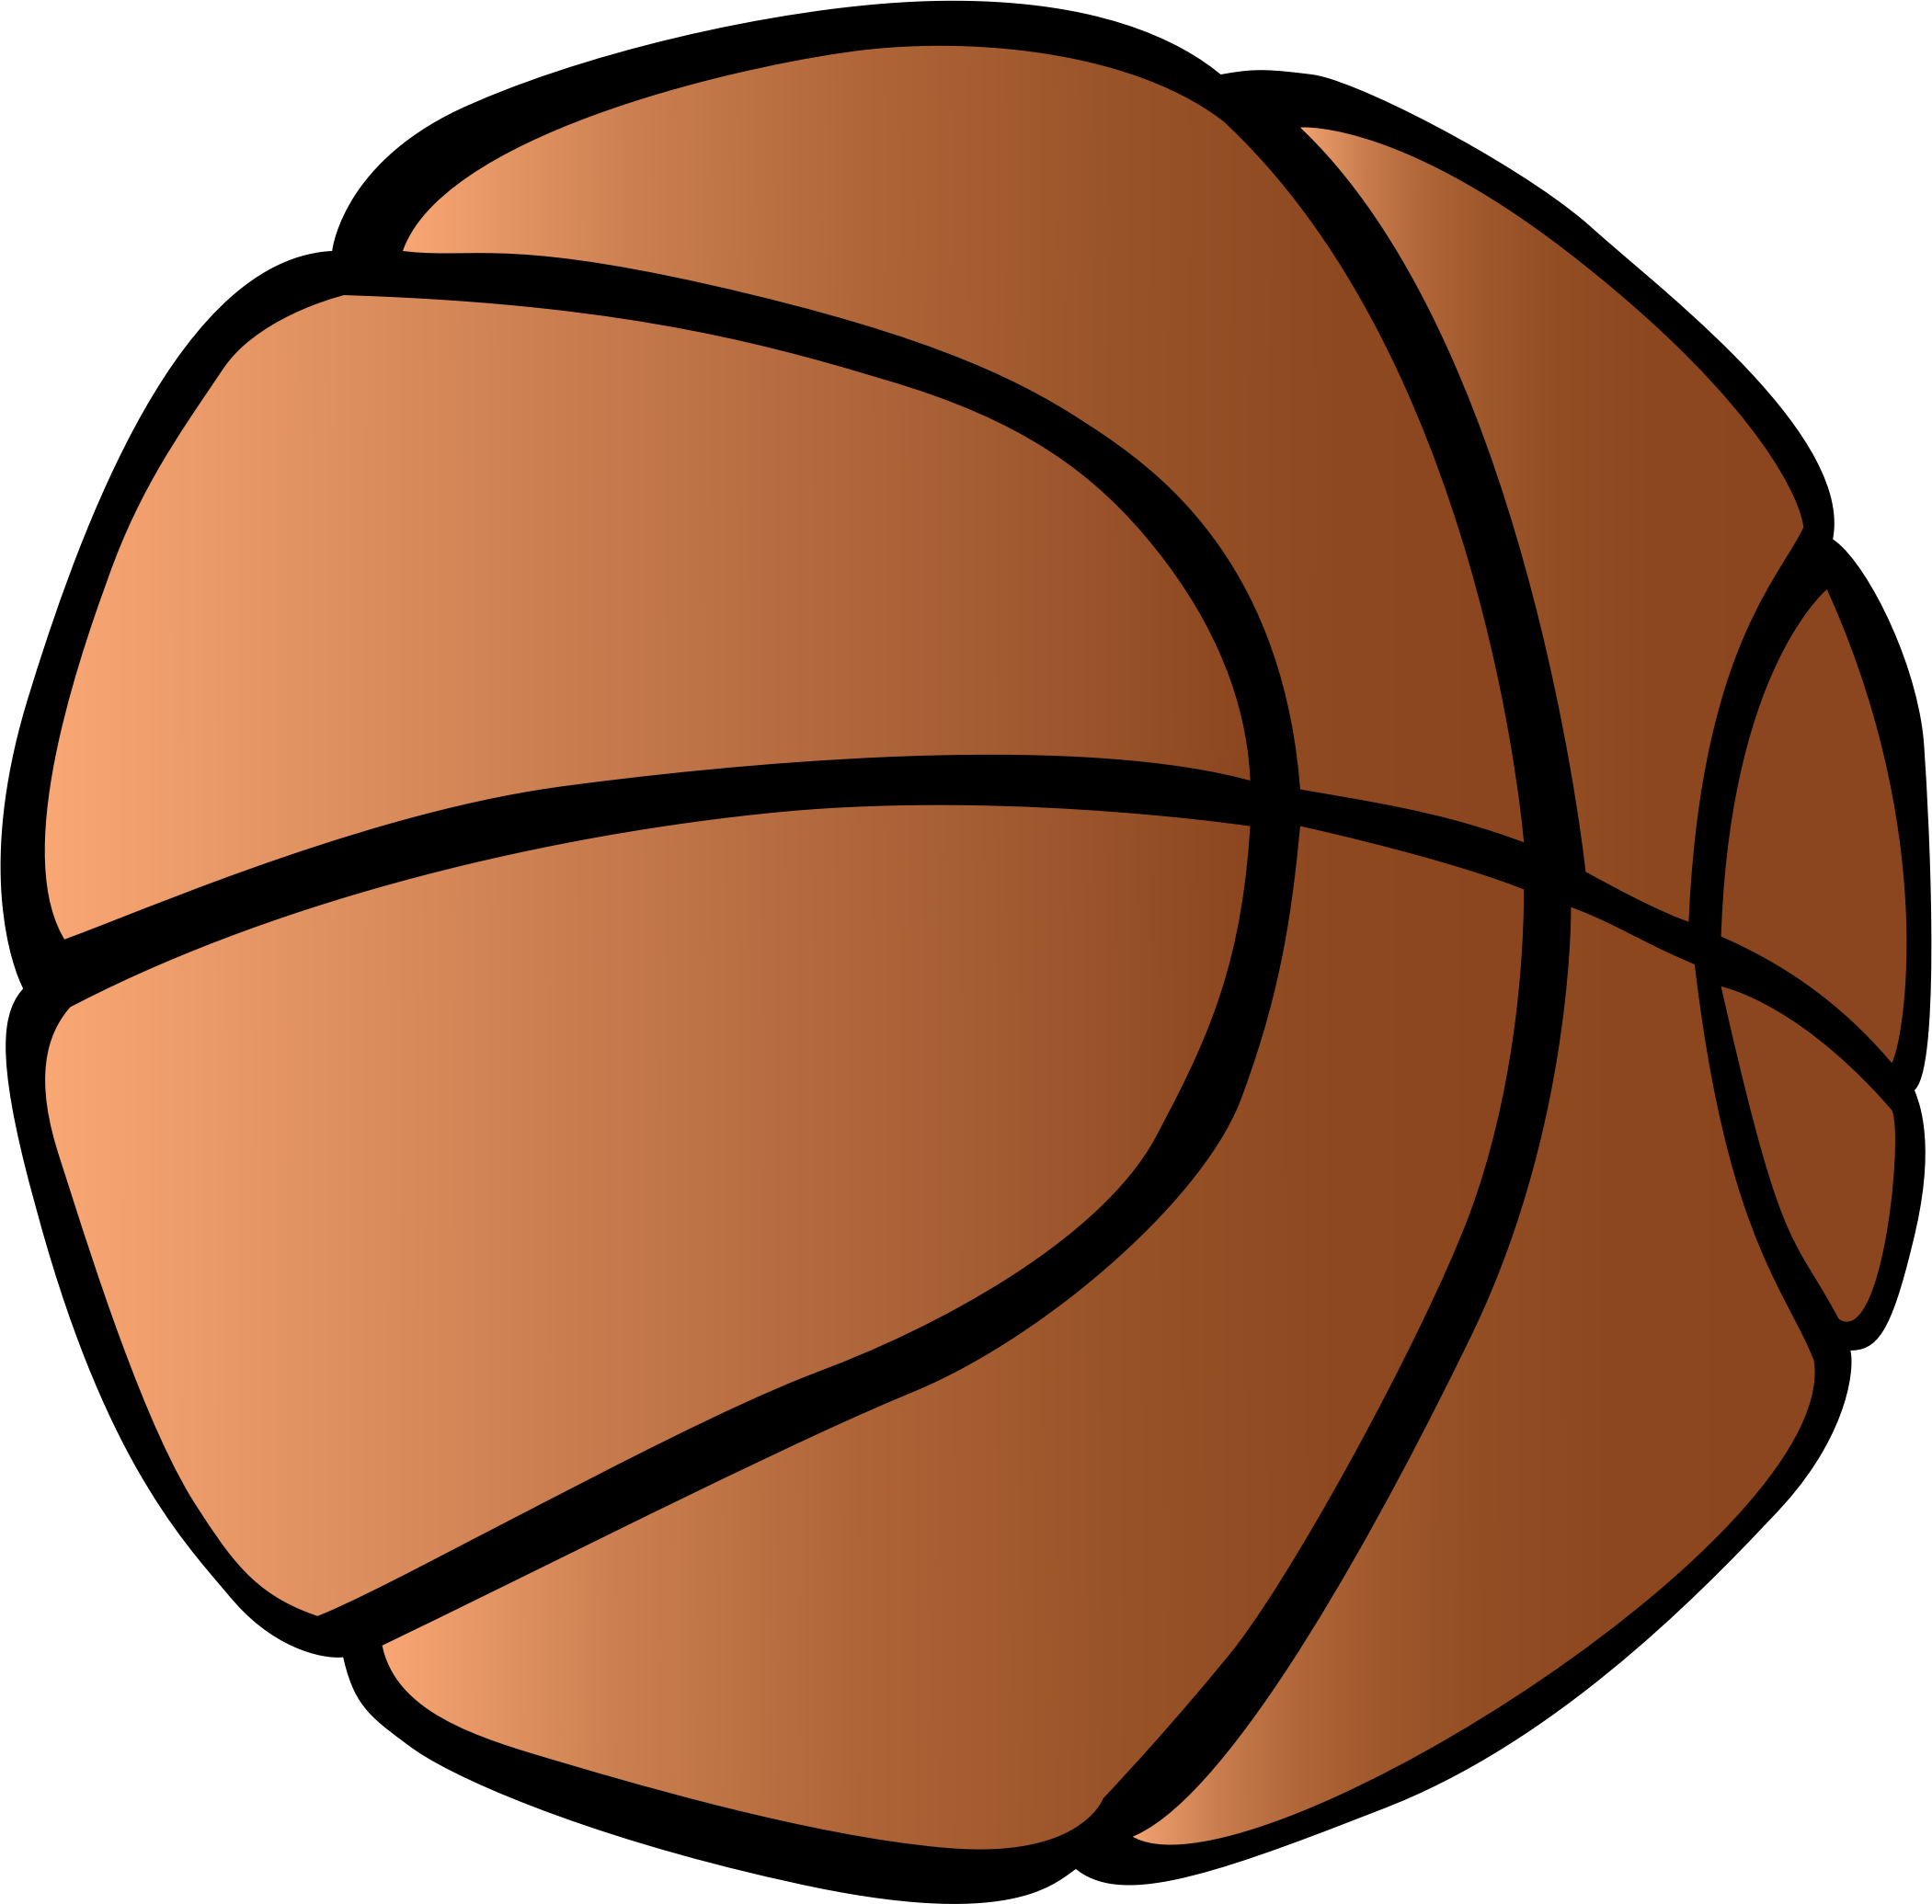 clipart of a basketball - photo #50